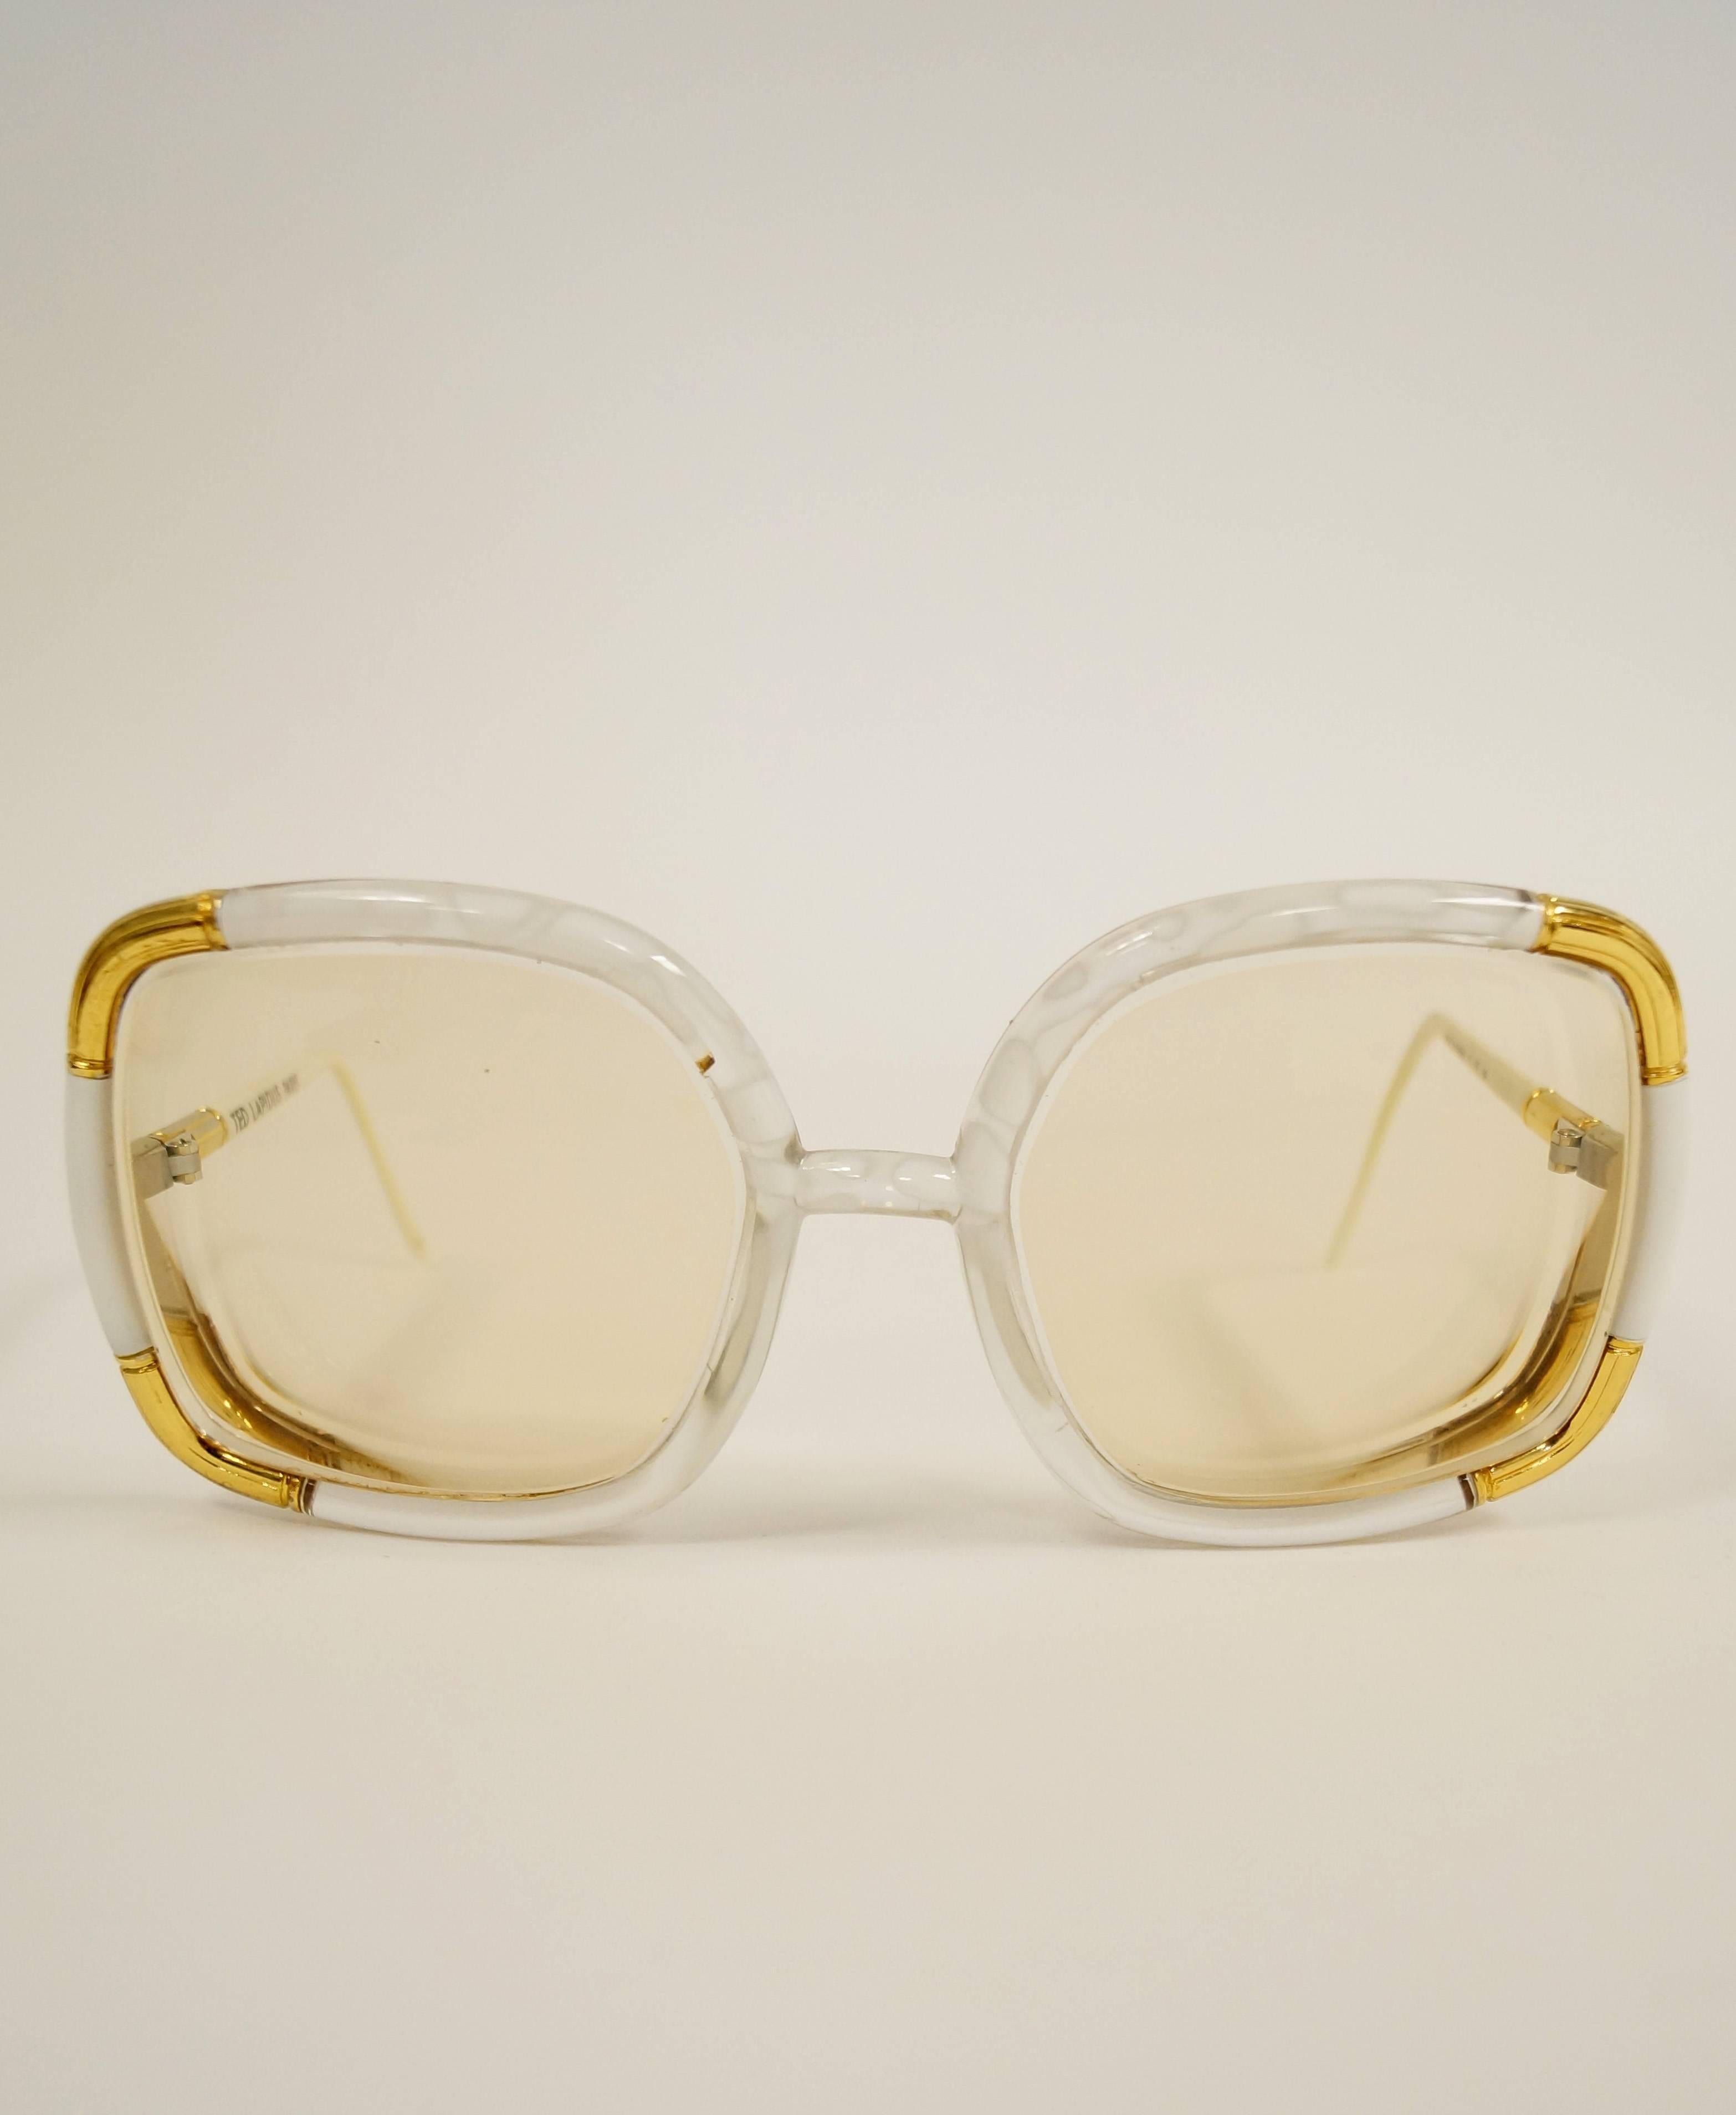 1970s Ted Lapidus Paris RX frames. These playful and vibrant oversized sunglasses are square-shaped (with a gentle rounded edge!) and feature white single bridge frames (with fantastic gold-tone accents!). The lenses have a solid amber tint, and the